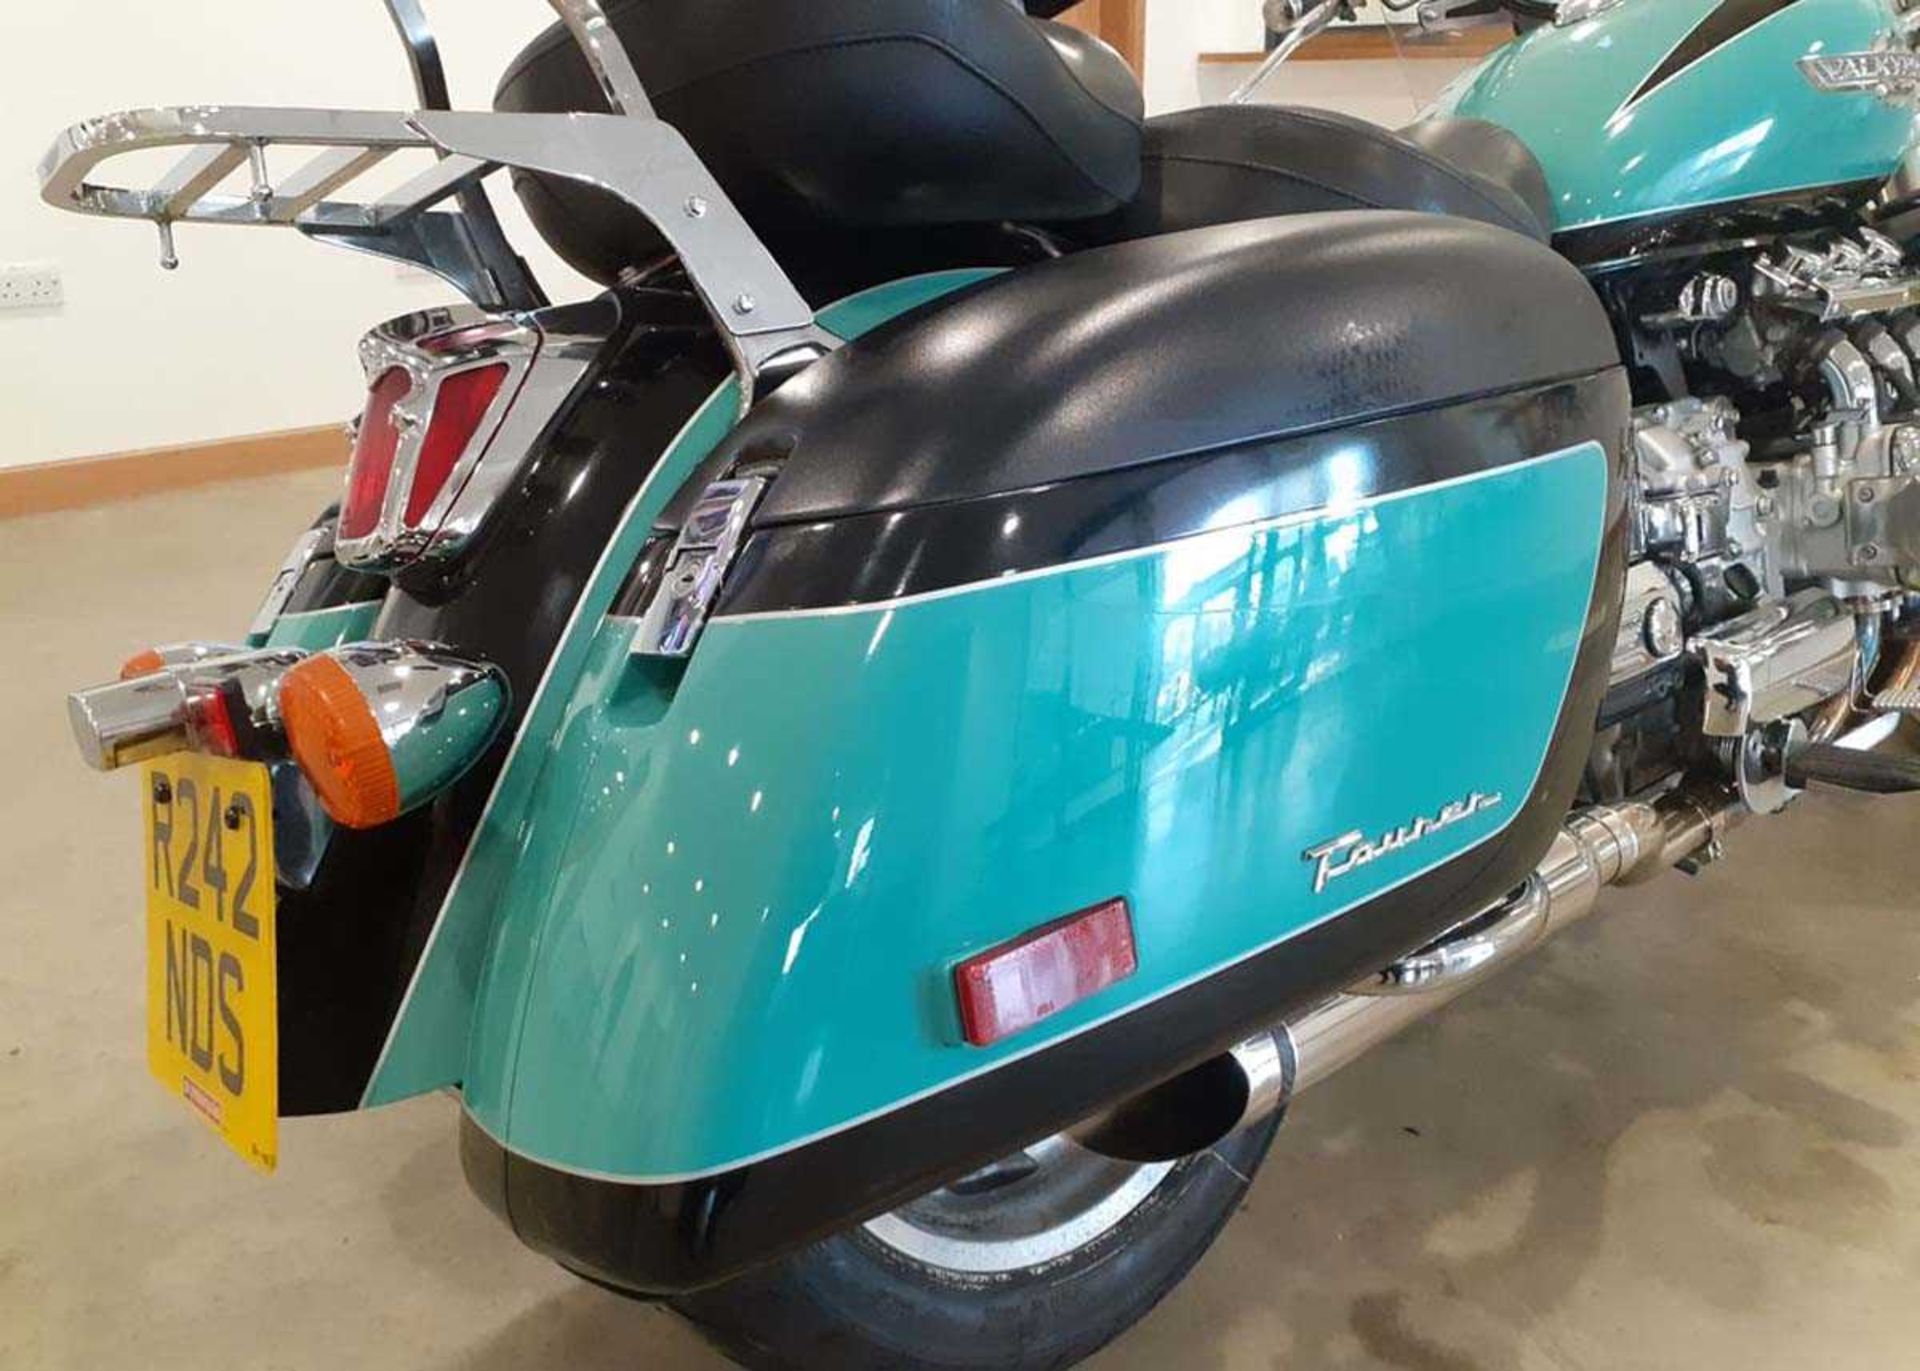 (1998) Honda Valkyrie F6 Tourer Motorbike in turquoise and black, first registered in UK 01/08/21, - Image 8 of 11